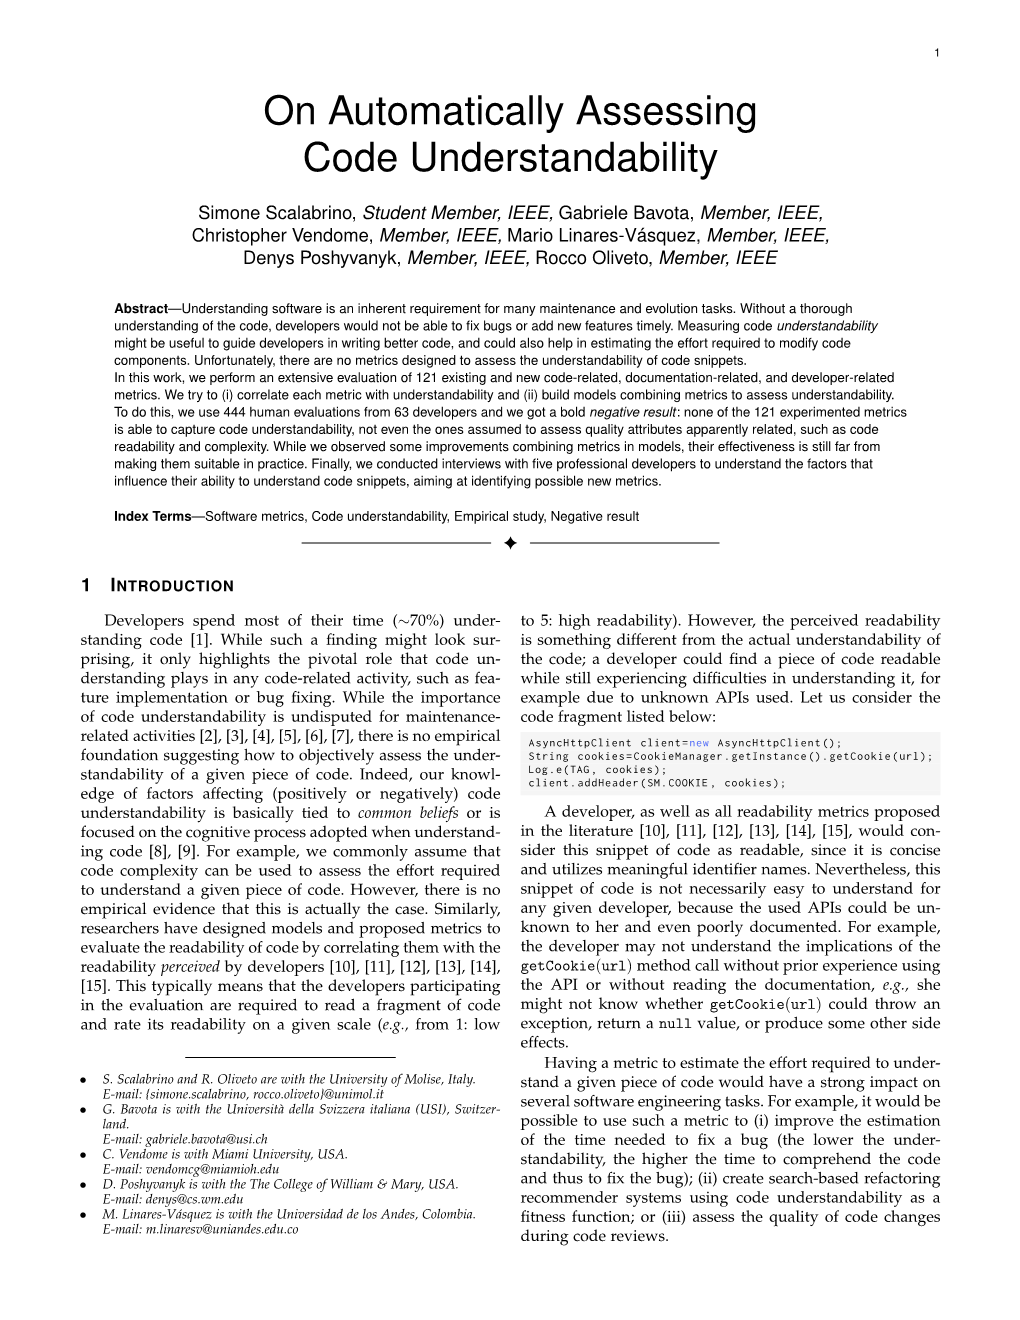 On Automatically Assessing Code Understandability